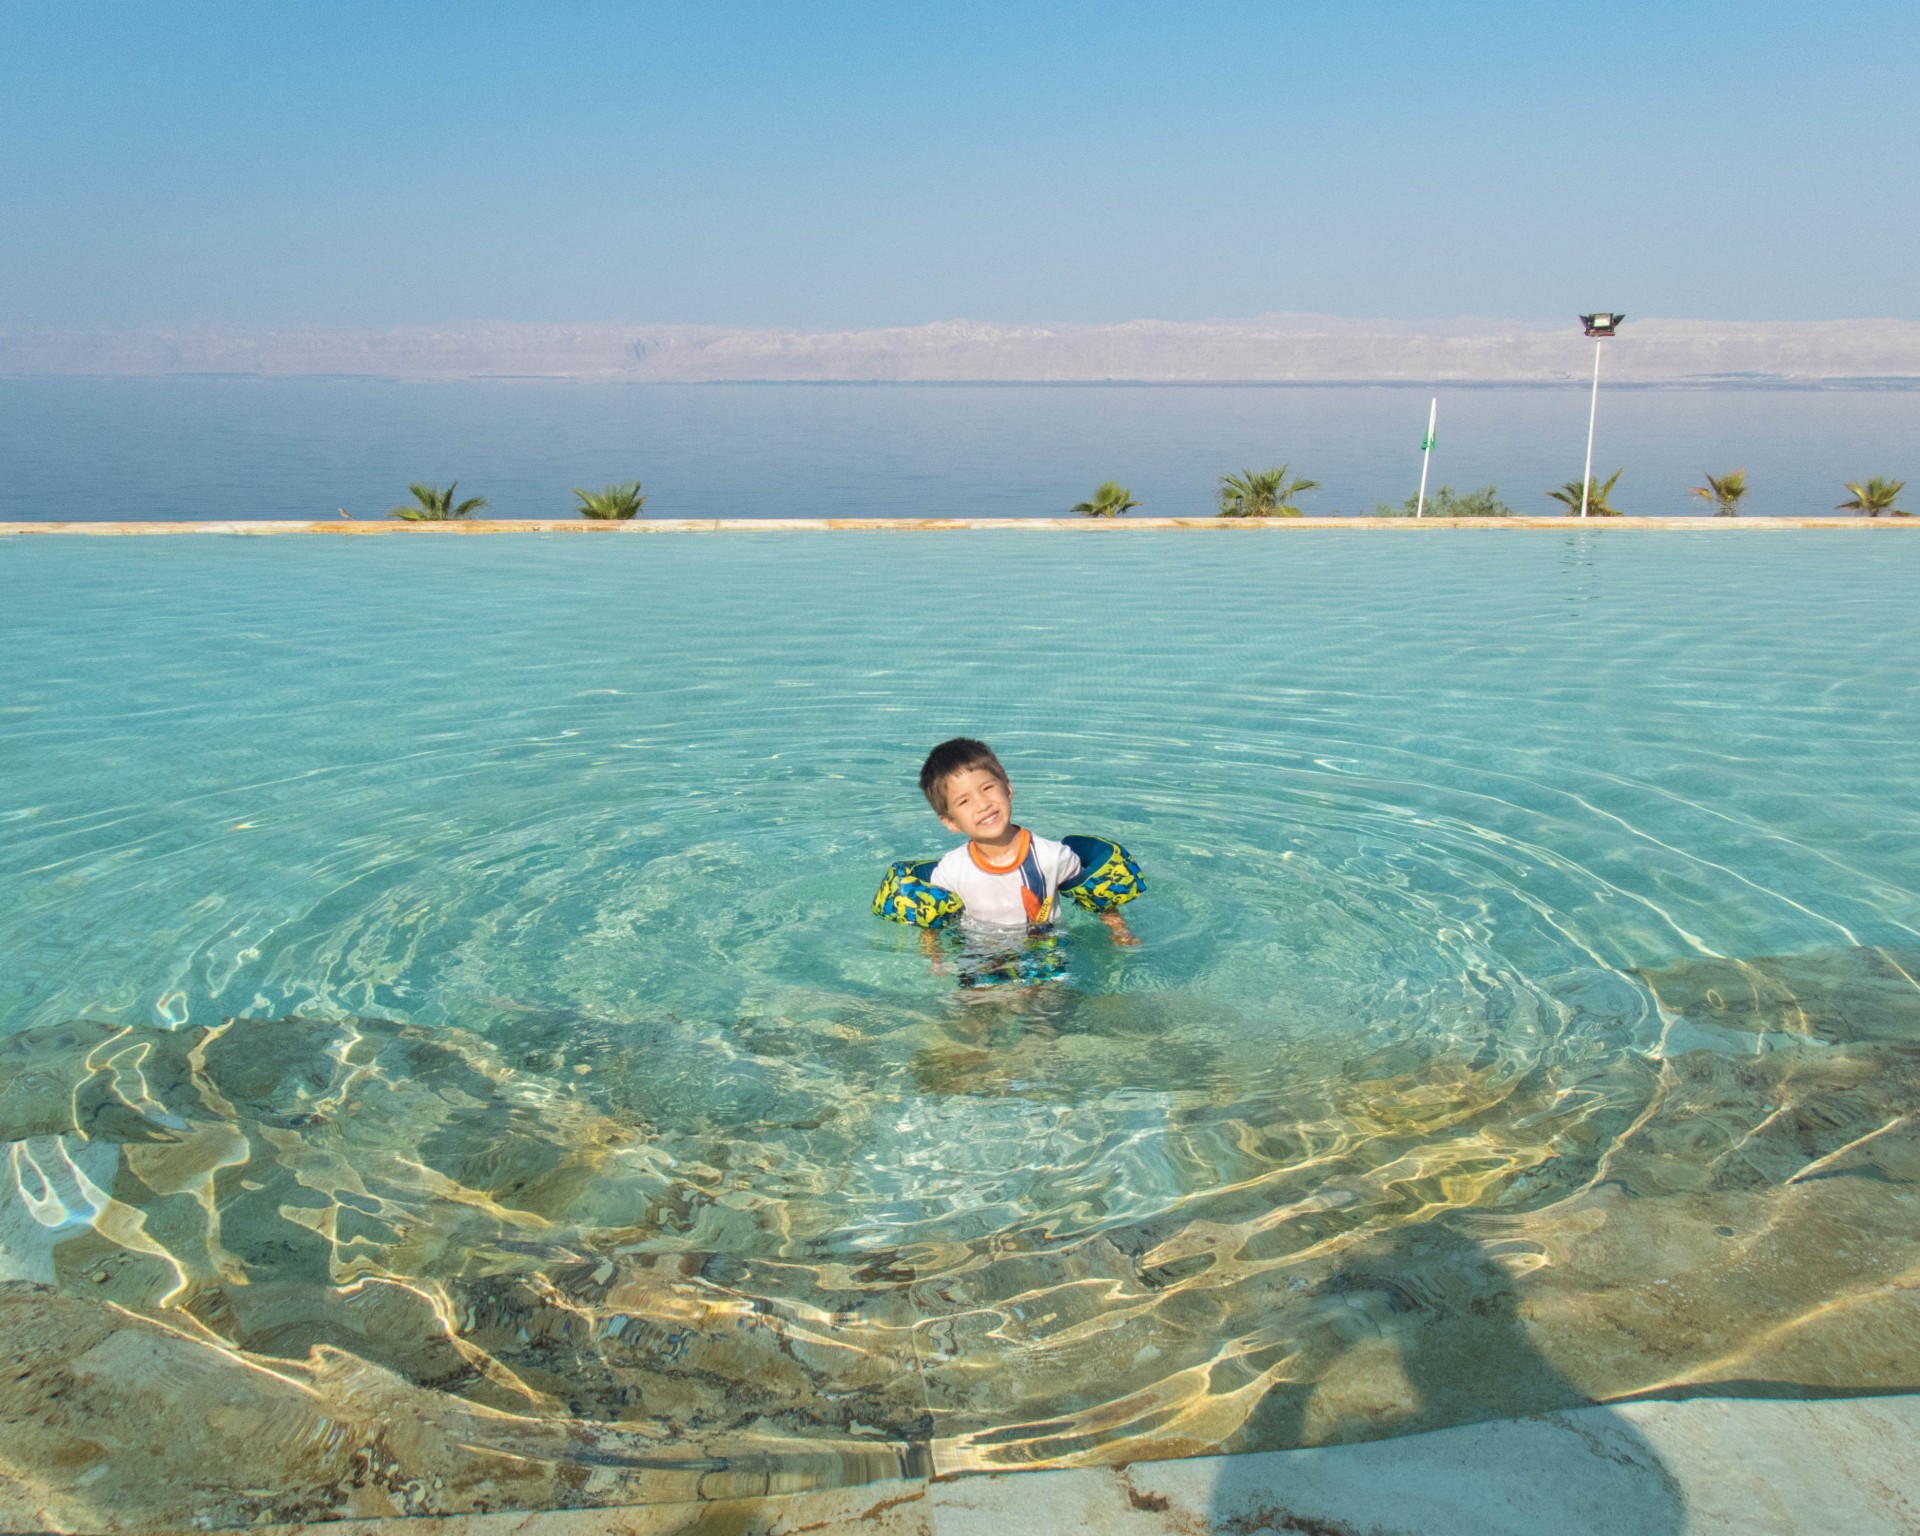 young boy smiles while in a pool with the Dead Sea in the background